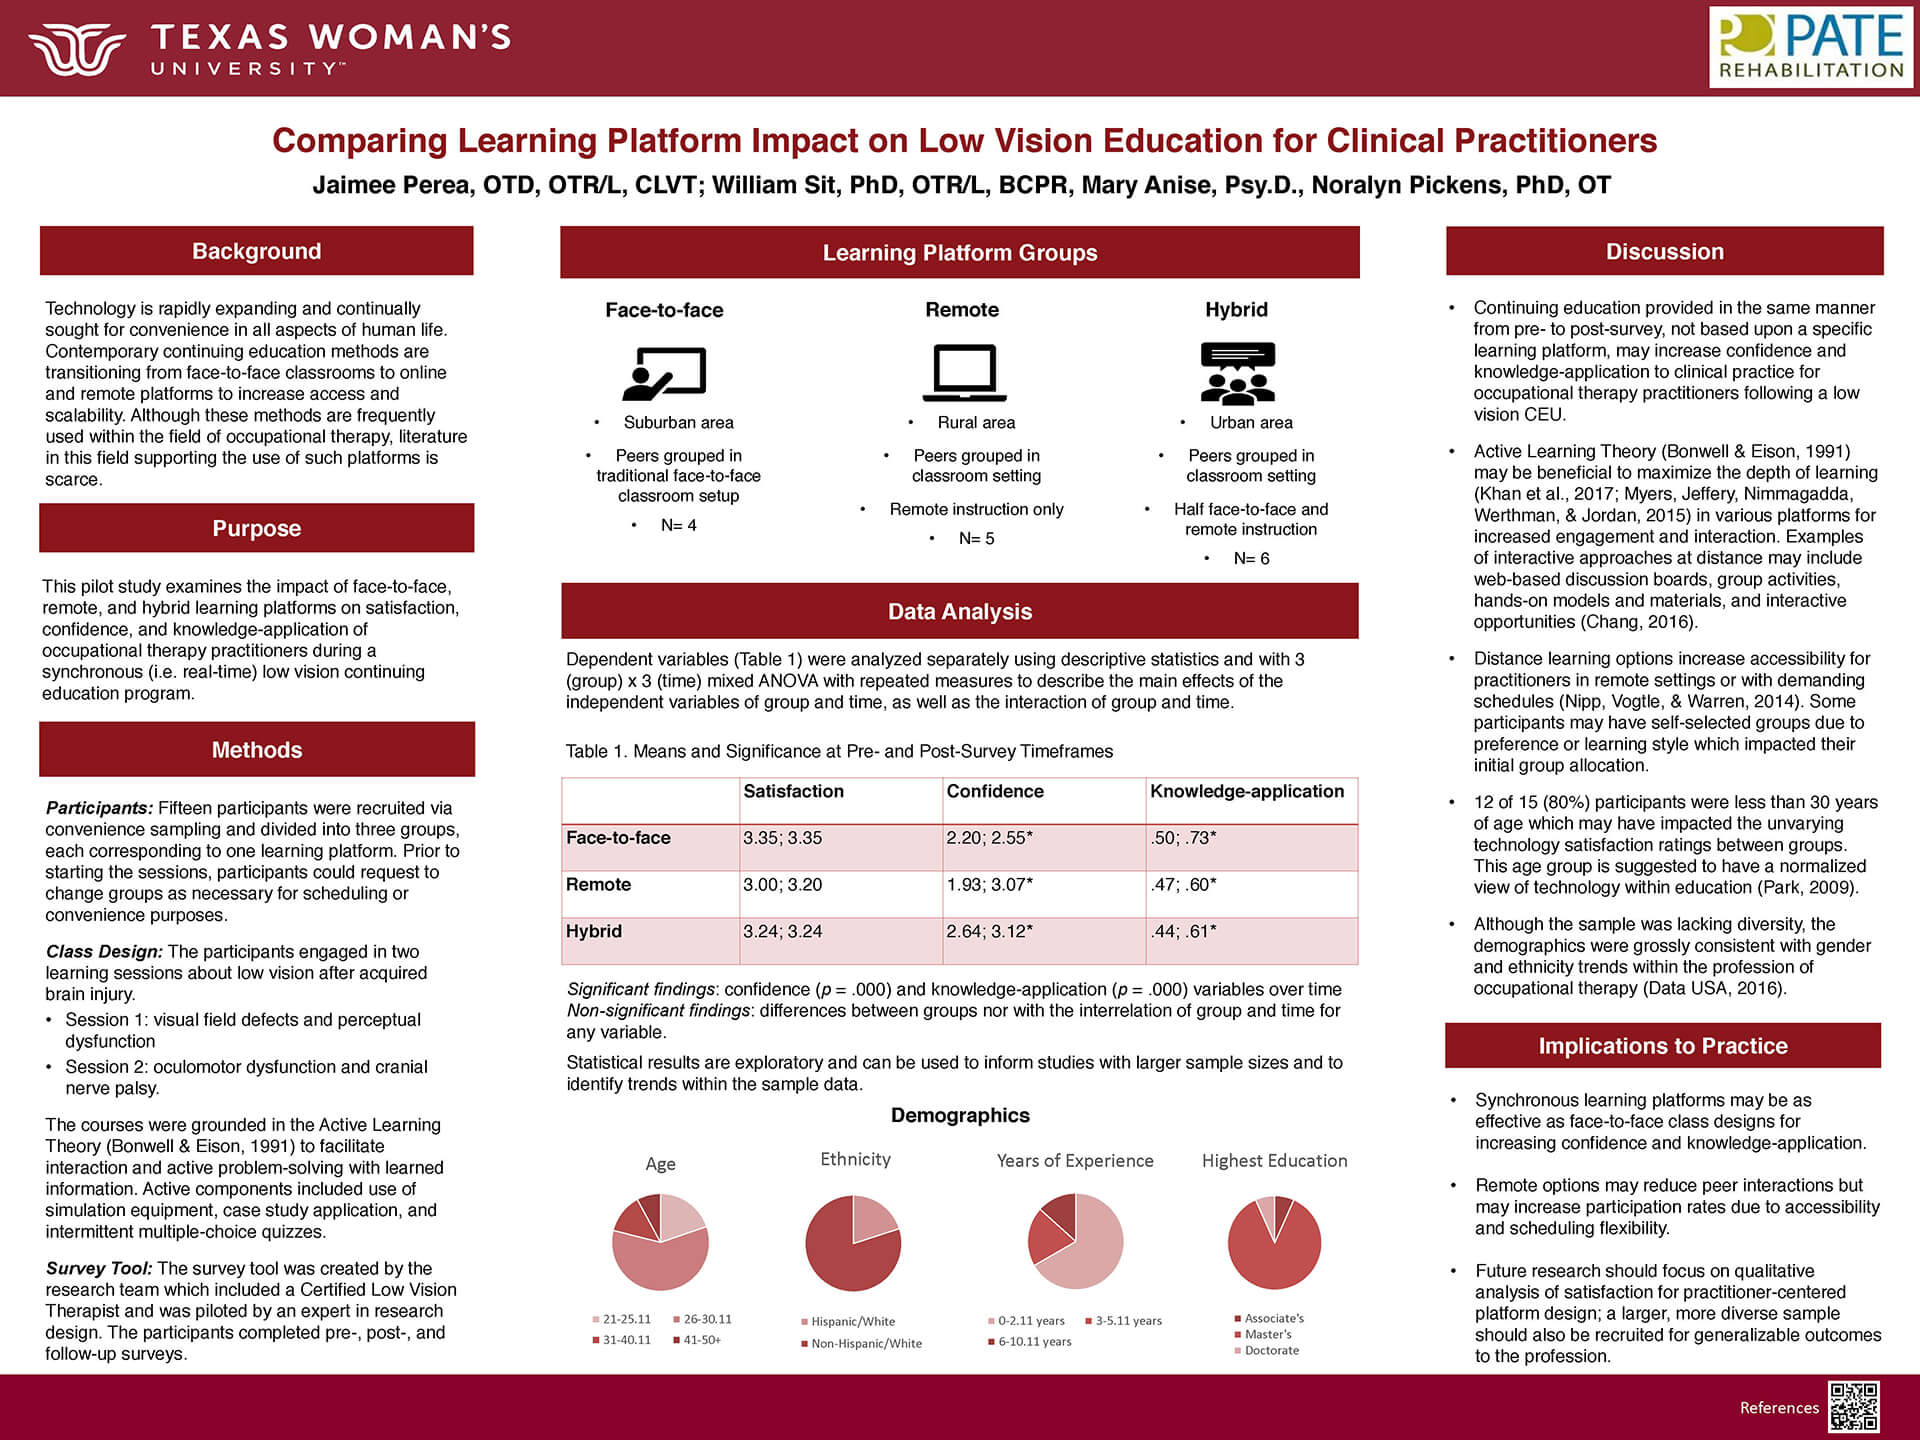 Comparing the Impact of Learning Platform on Low Vision Continuing Education for Clinical Practitioners